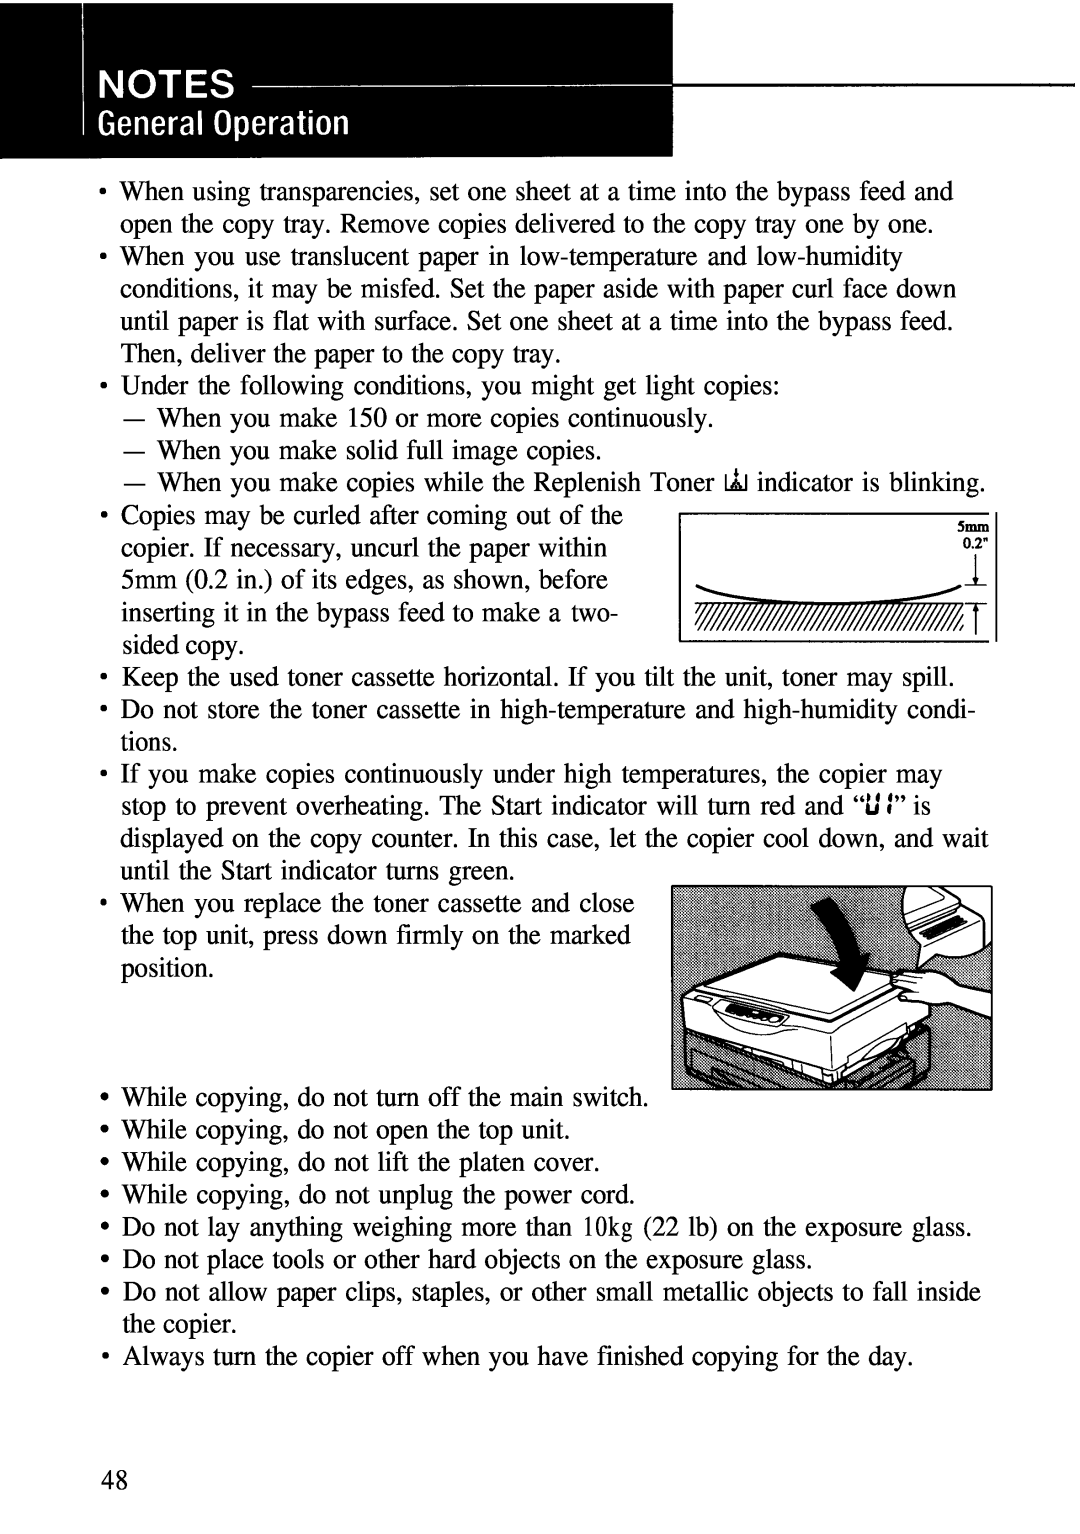 Ricoh 1008 manual Under the following conditions, you might get light copies, When you make 150 or more copies continuously 